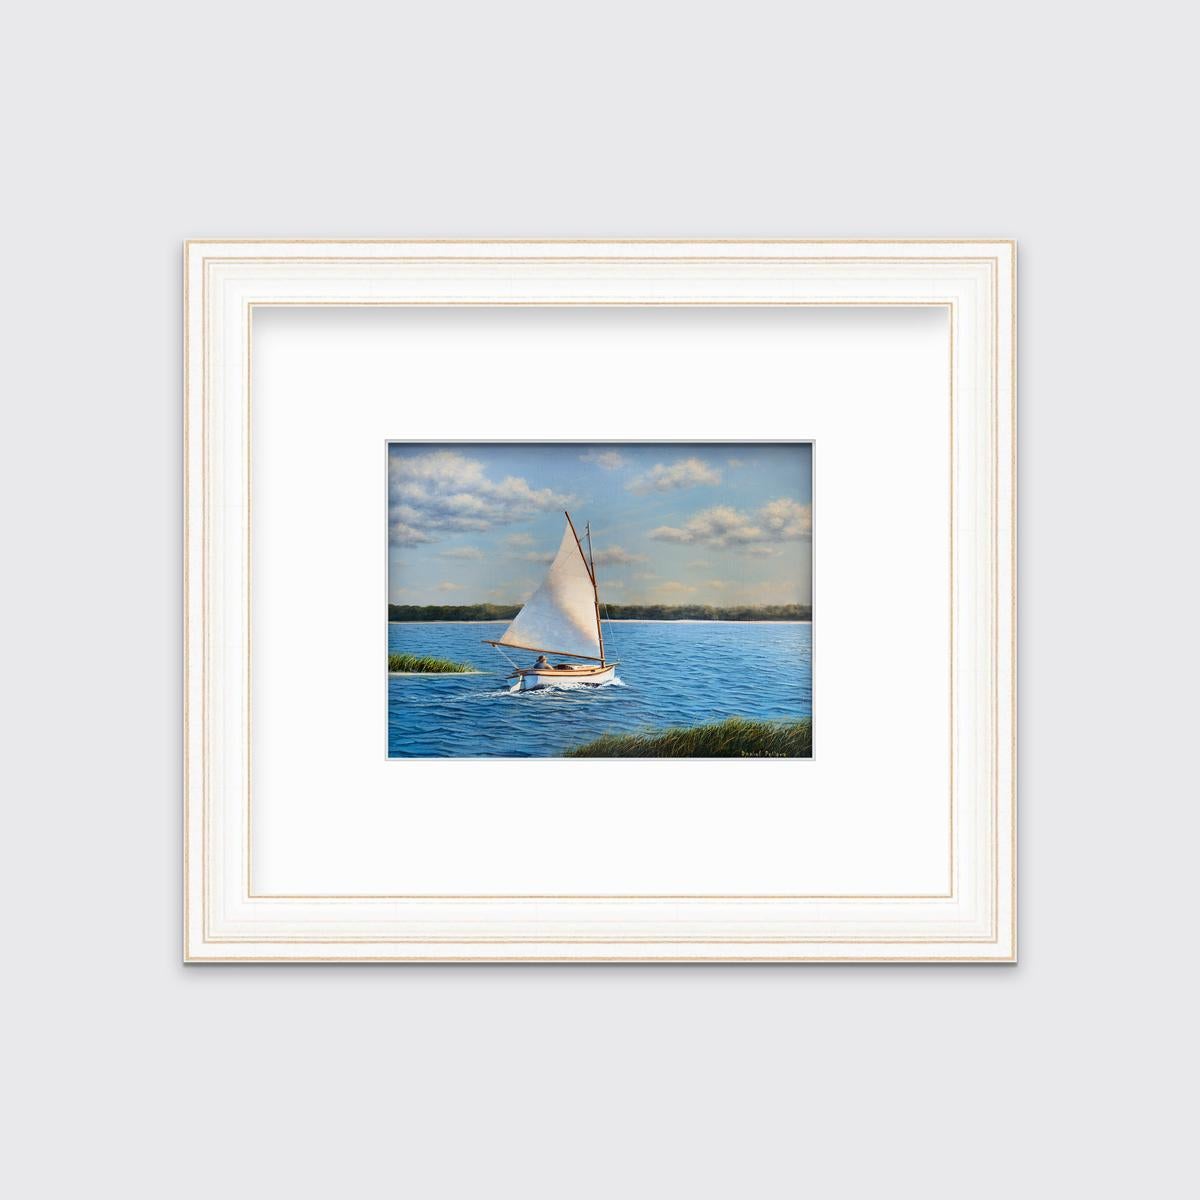 This limited edition print by Daniel Pollera depicts a figure wearing a hat, sitting in a sailboat, sailing out into the open bay. The sailboat creates misty ripples in the water as it sails toward the sun, which can be seen casting light and